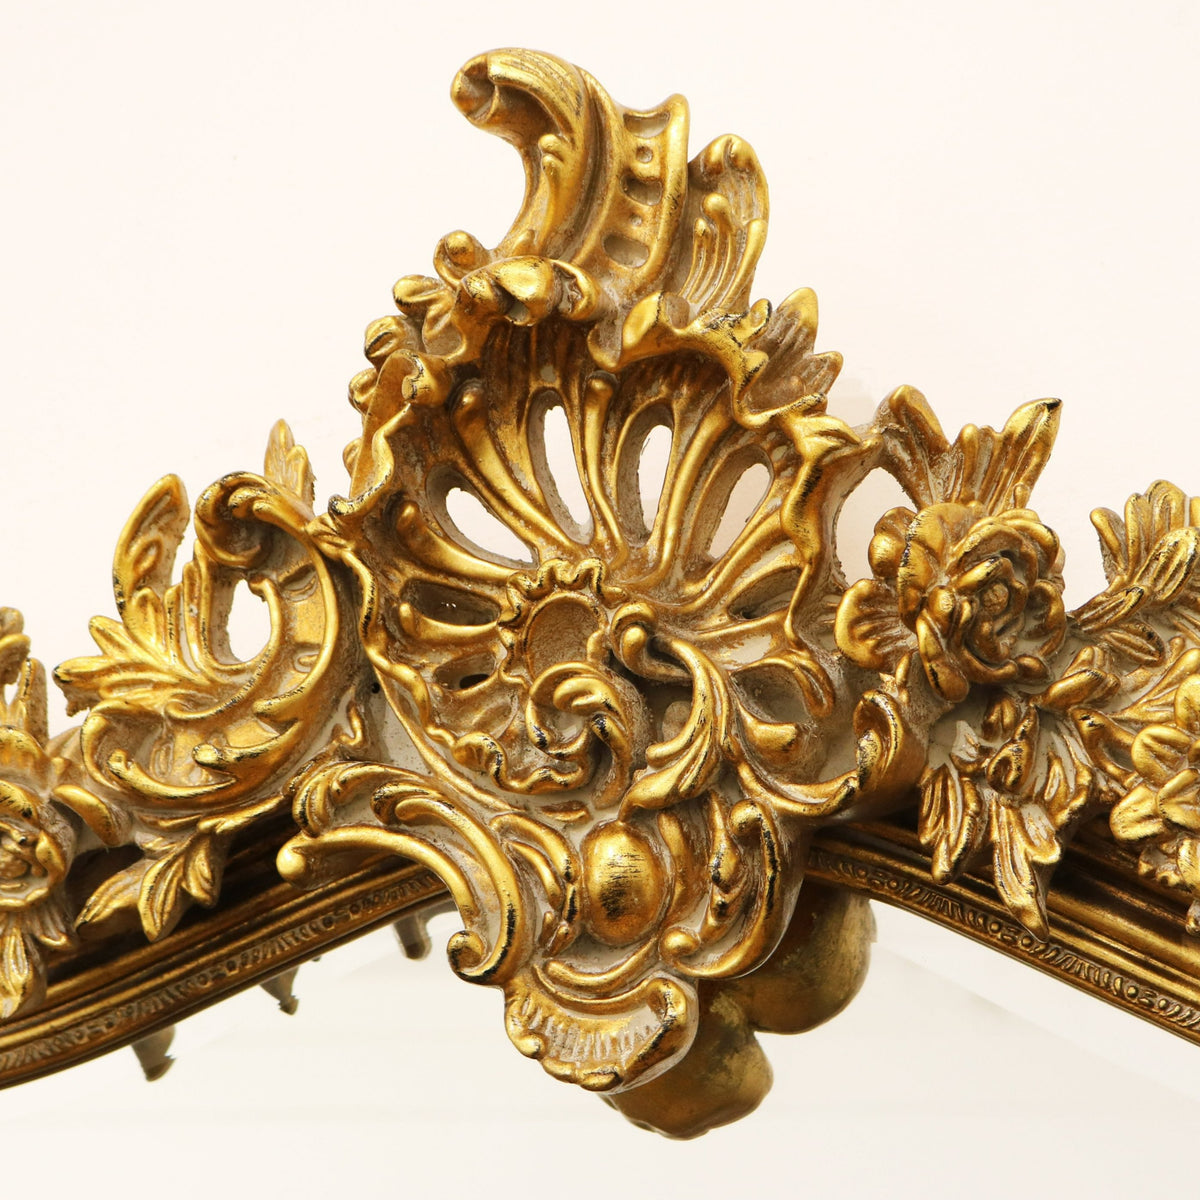 Gold Arched Ornate Overmantle Wall Mirror detail shot of intricate frame design